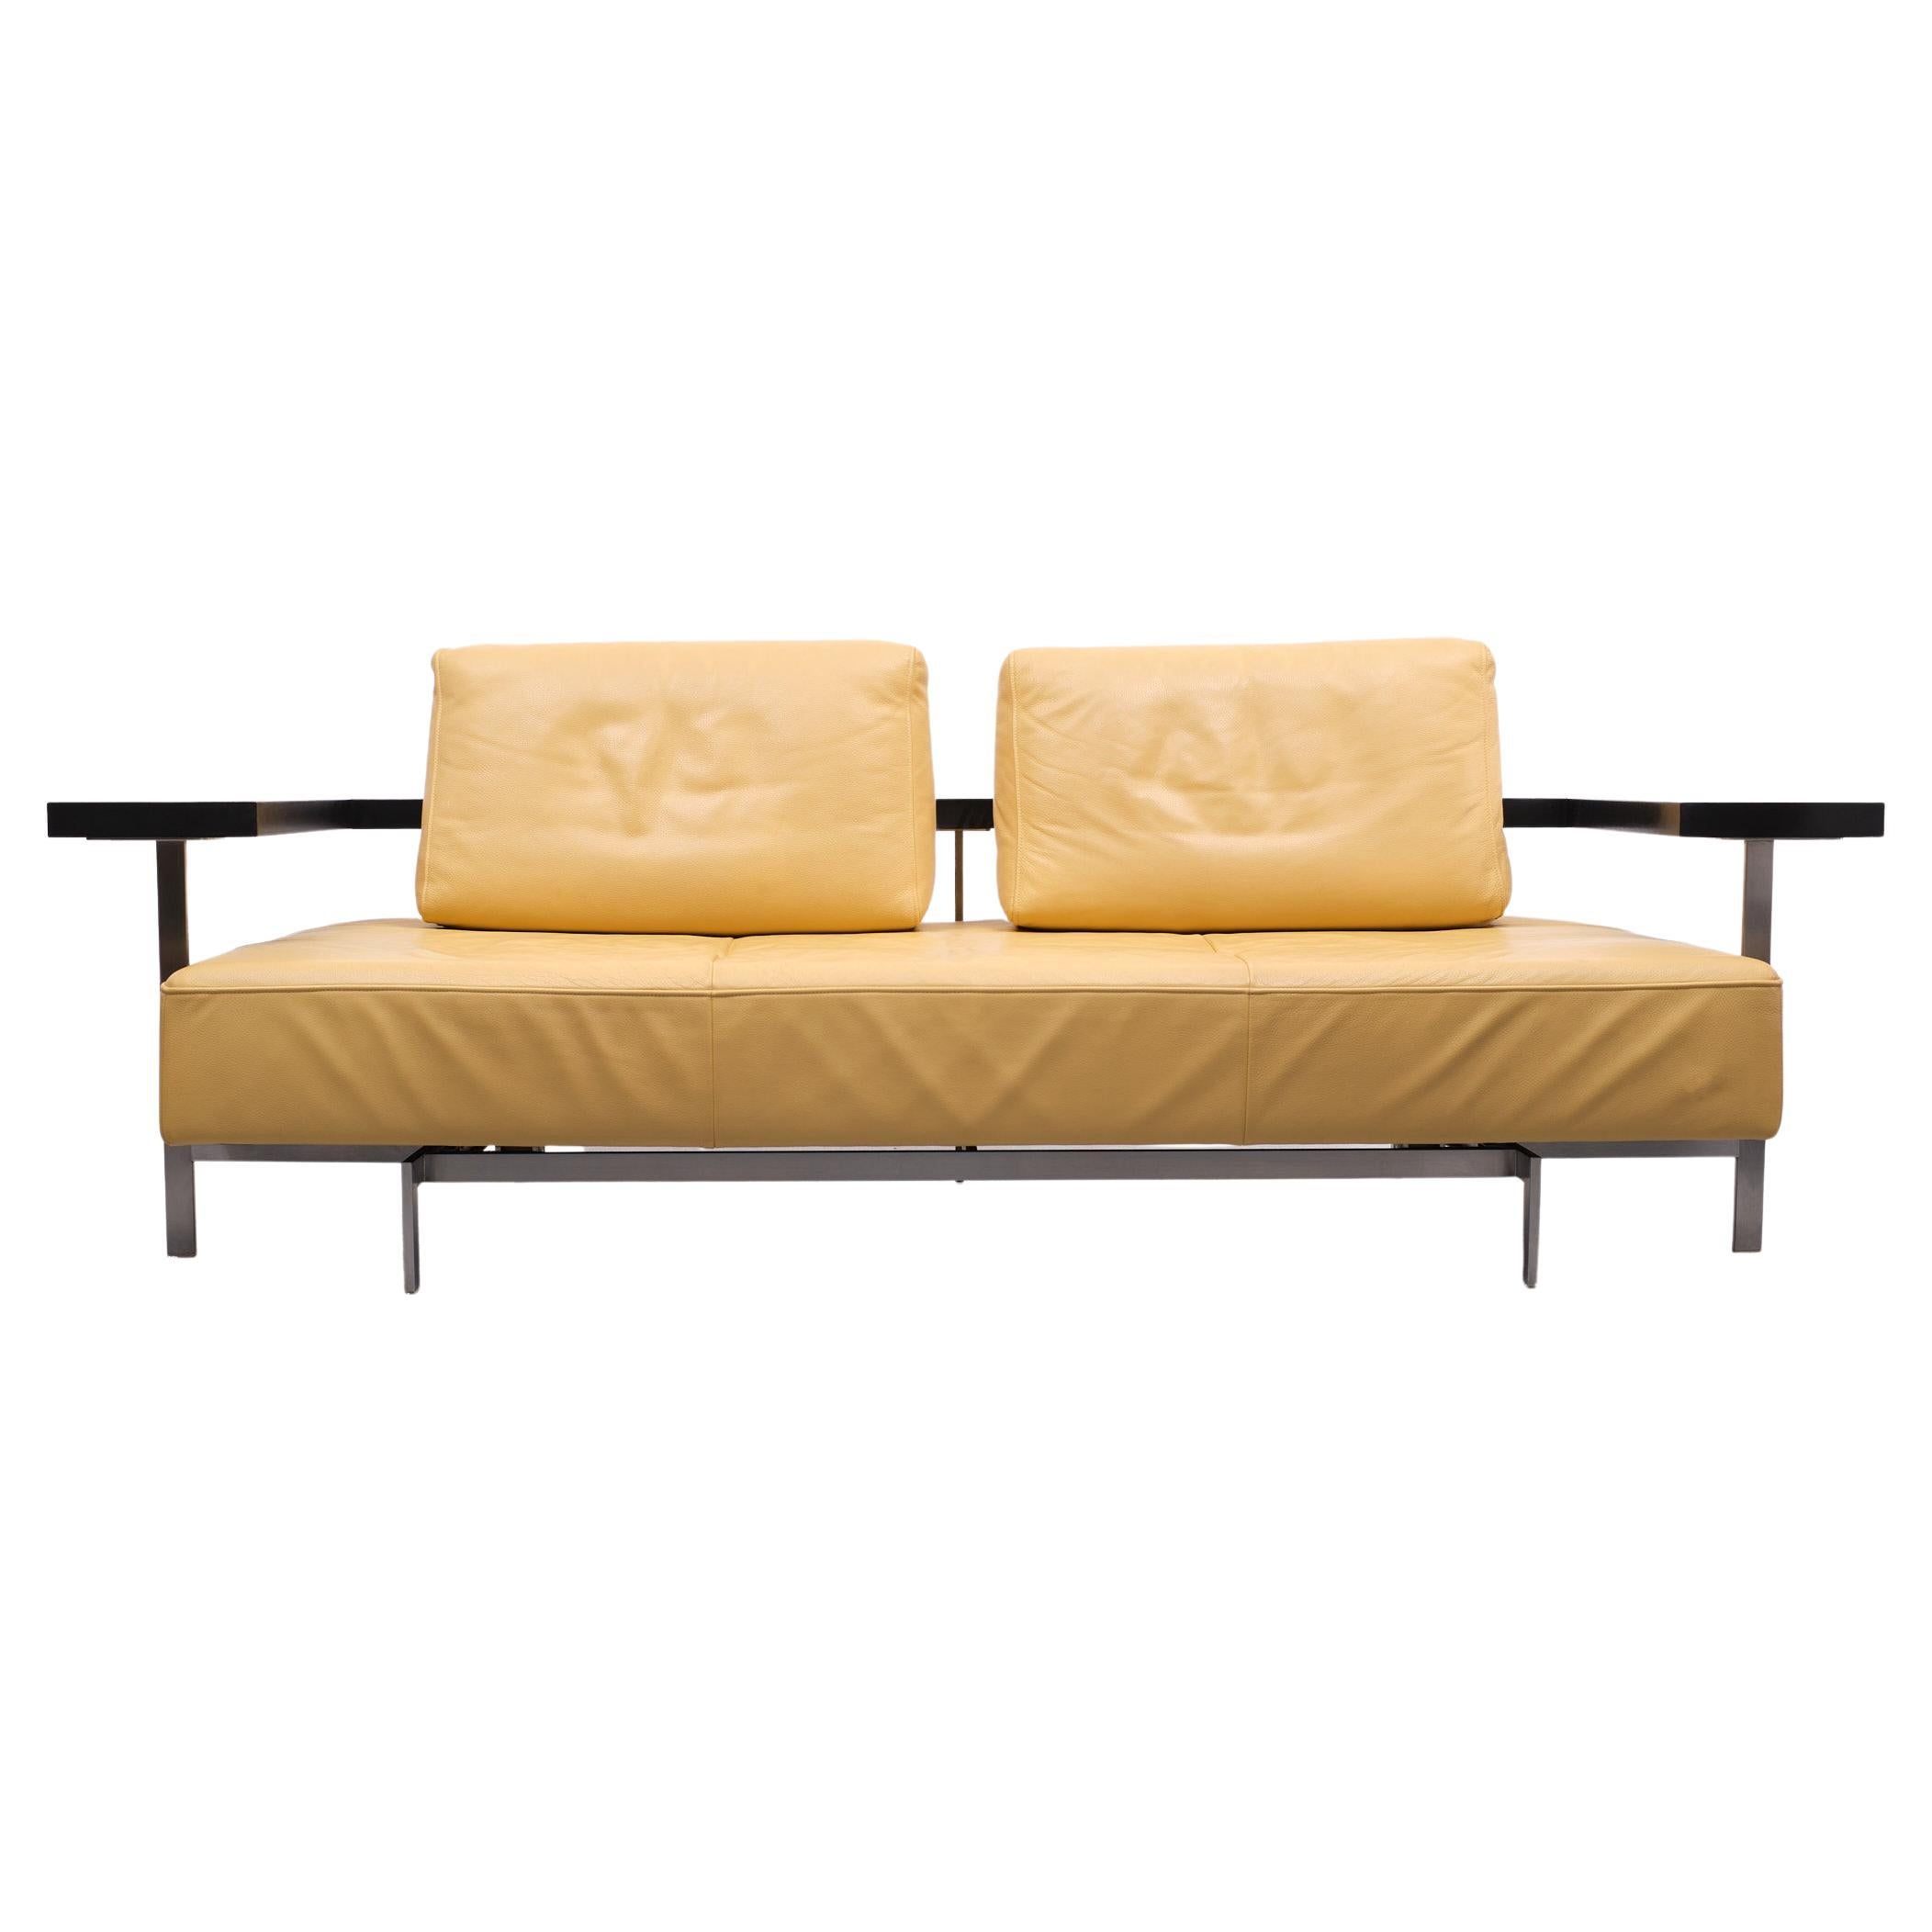 Large  Dono Sofa Daybed by Christian Werner for Rolf Benz  Germany 